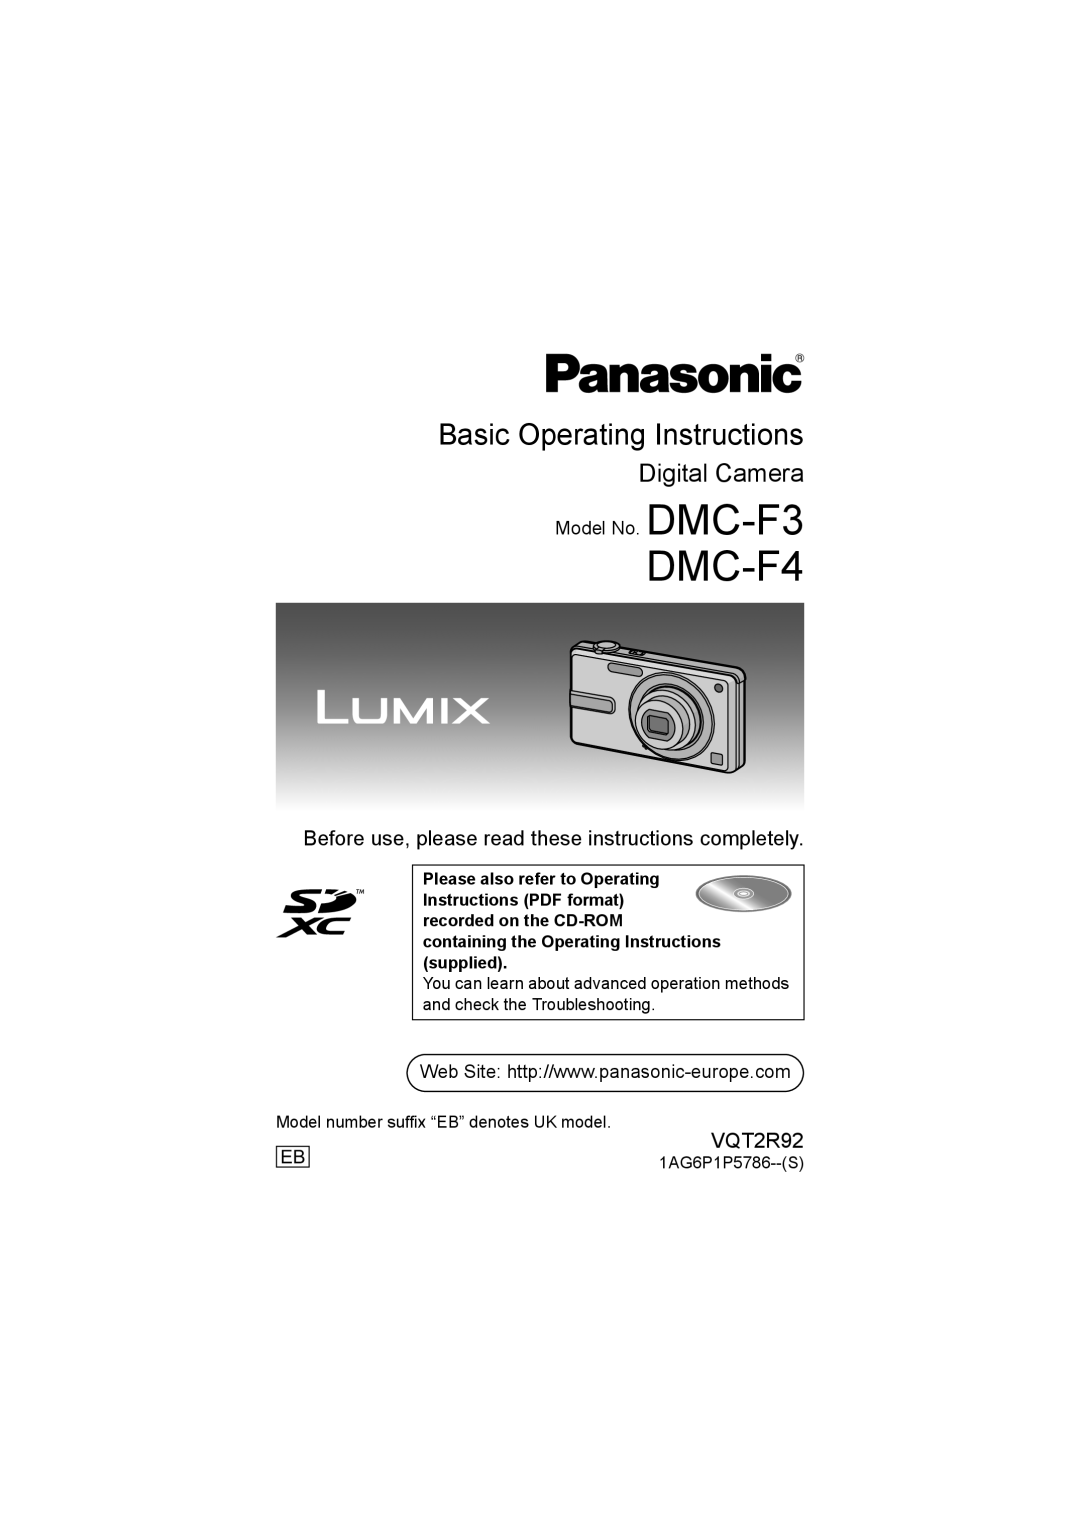 Panasonic DMC-F4 operating instructions Before use, please read these instructions completely, VQT2R92, Model No. DMC-F3 